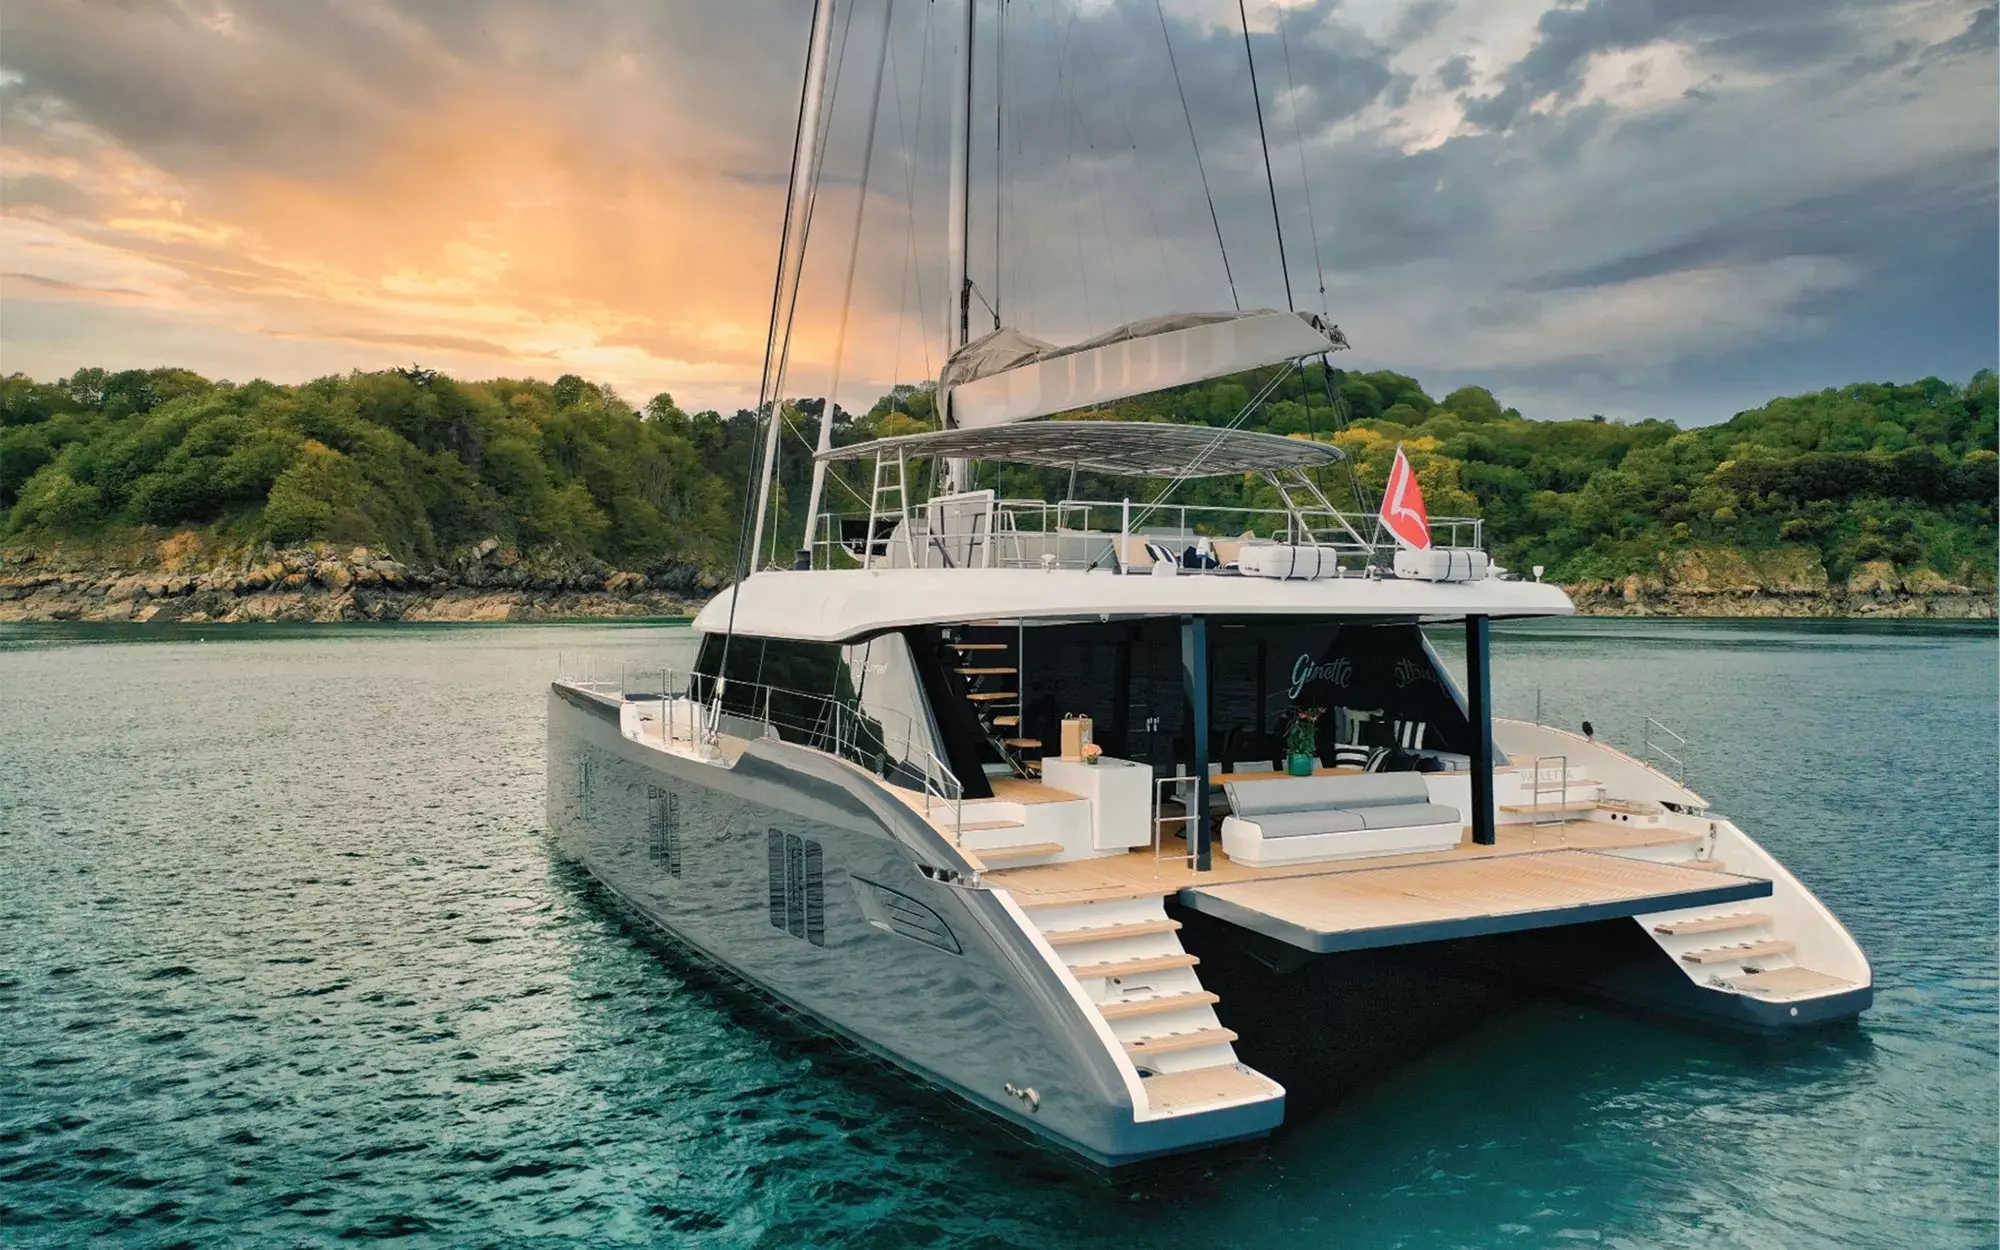 Ginette by Sunreef Yachts - Top rates for a Charter of a private Luxury Catamaran in New Zealand